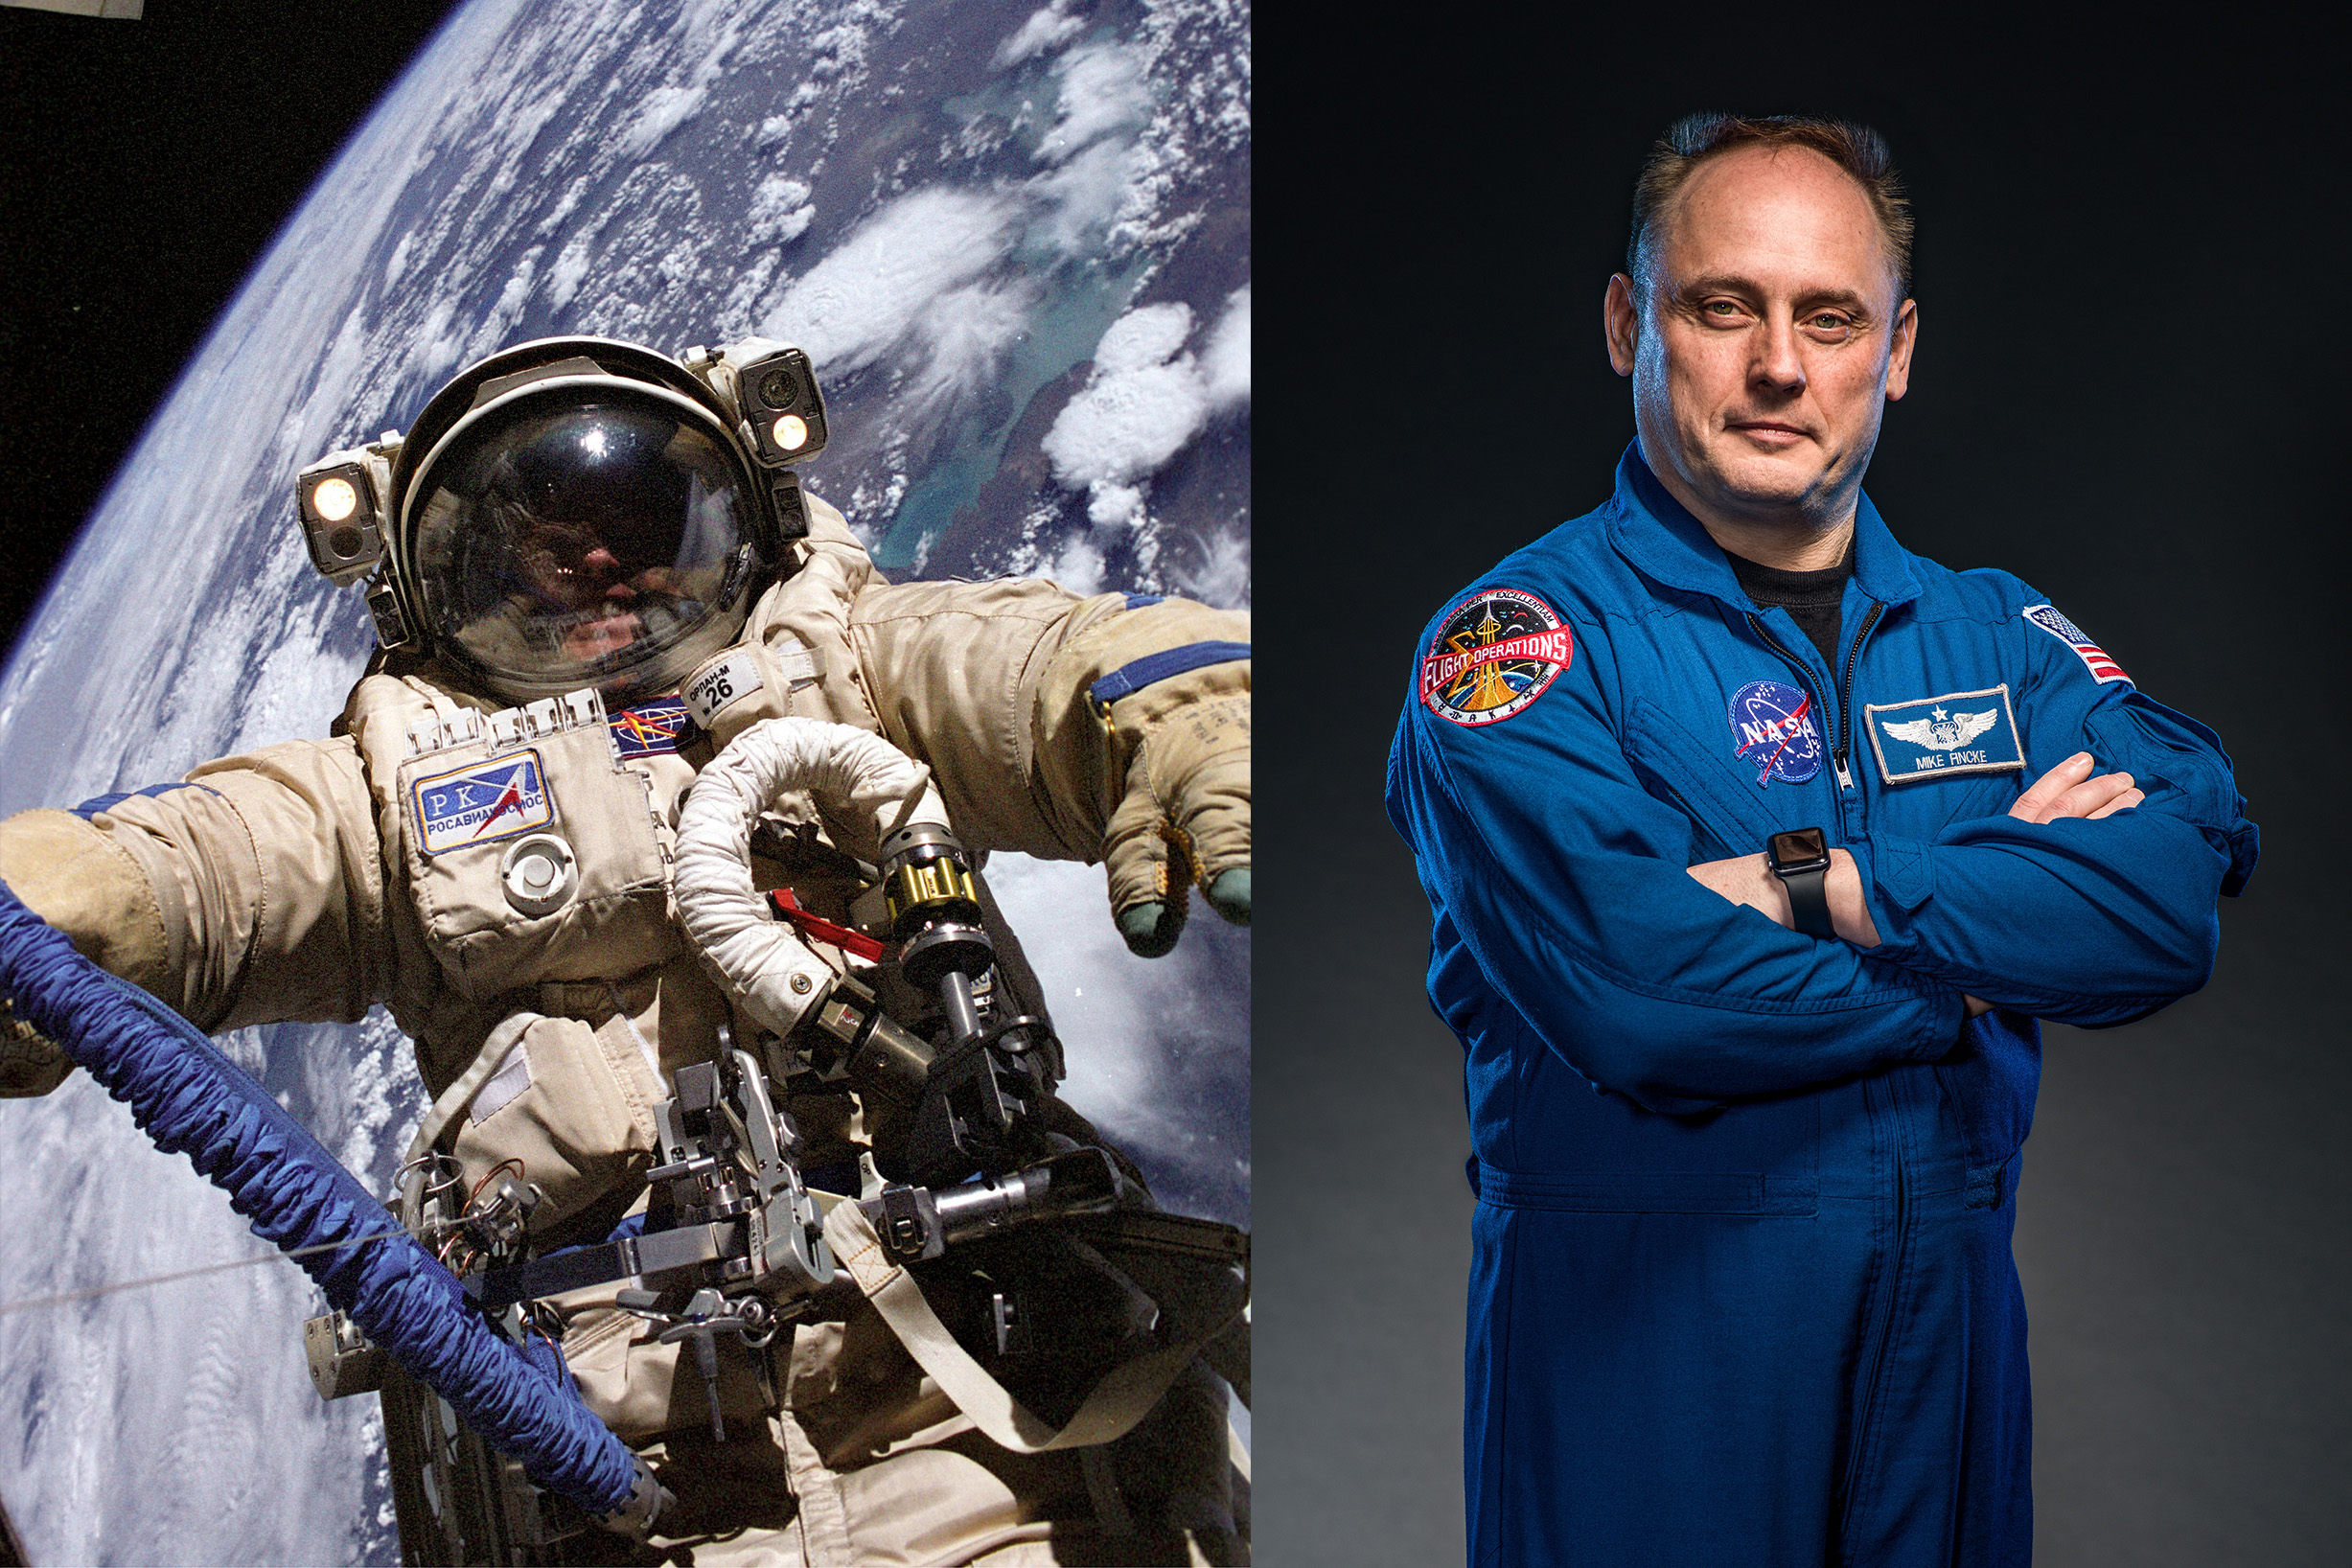 Astronaut Michael Fincke ’89 offers students out-of-this-world advice